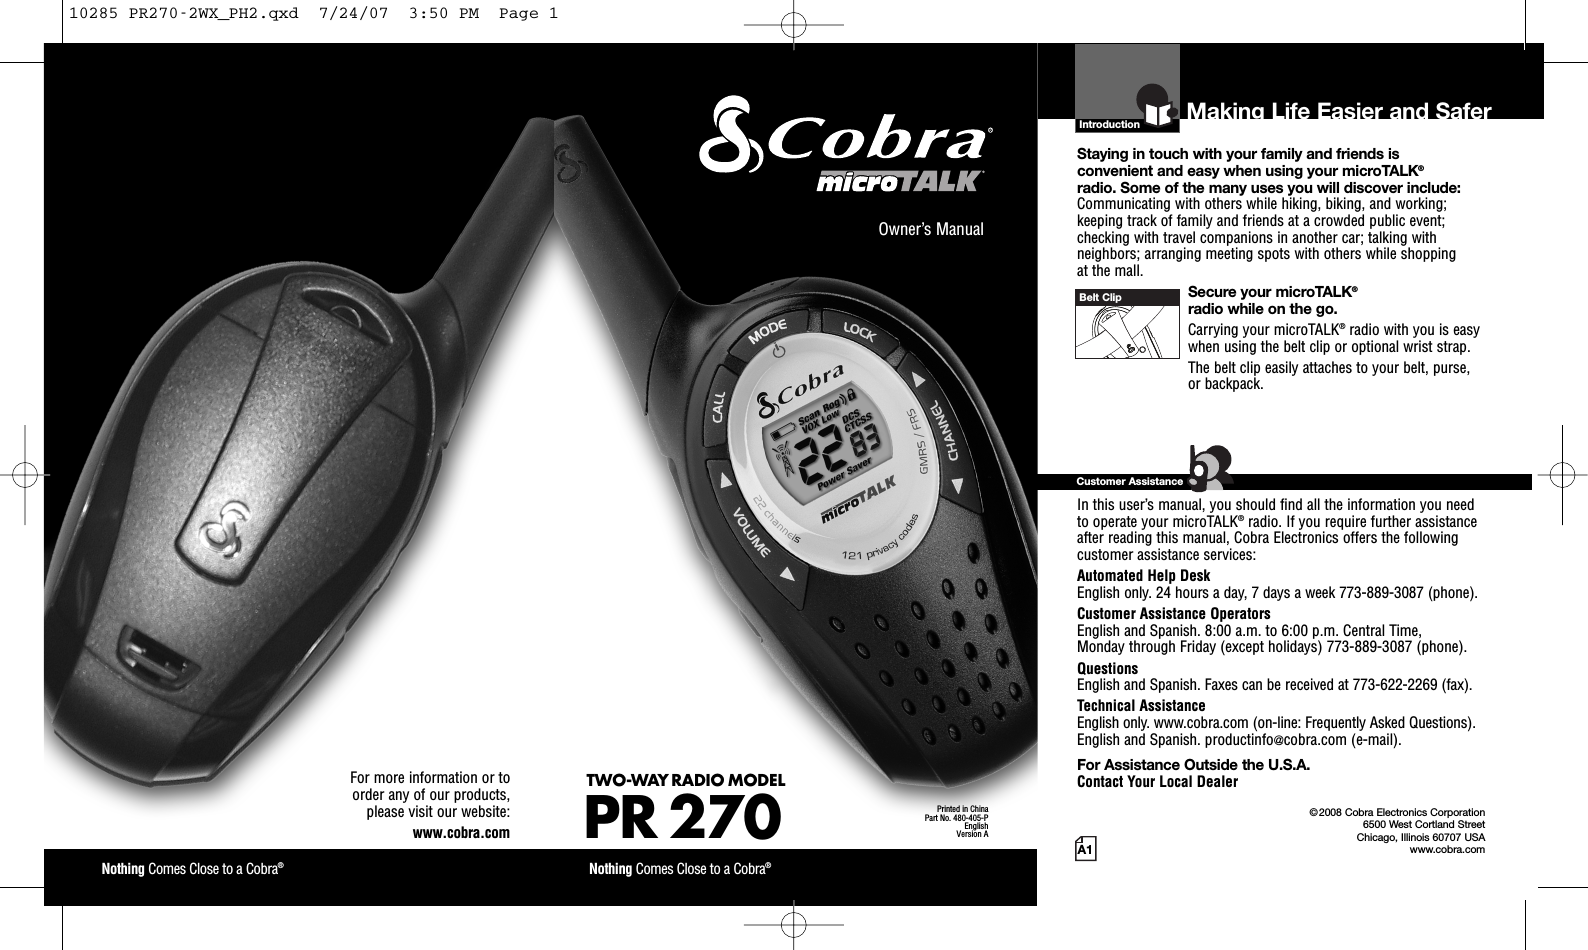 Introduction©2008 Cobra Electronics Corporation6500 West Cortland StreetChicago, Illinois 60707 USAwww.cobra.comMaking Life Easier and SaferStaying in touch with your family and friends is convenient and easy when using your microTALK®radio. Some of the many uses you will discover include:Communicating with others while hiking, biking, and working;keeping track of family and friends at a crowded public event;checking with travel companions in another car; talking withneighbors; arranging meeting spots with others while shopping at the mall.Secure your microTALK®radio while on the go.Carrying your microTALK®radio with you is easywhen using the belt clip or optional wrist strap. The belt clip easily attaches to your belt, purse, or backpack.For Assistance in the U.S.A. In this user’s manual, you should find all the information you needto operate your microTALK®radio. If you require further assistanceafter reading this manual, Cobra Electronics offers the followingcustomer assistance services:Automated Help Desk English only. 24 hours a day, 7 days a week 773-889-3087 (phone). Customer Assistance OperatorsEnglish and Spanish. 8:00 a.m. to 6:00 p.m. Central Time, Monday through Friday (except holidays) 773-889-3087 (phone). QuestionsEnglish and Spanish. Faxes can be received at 773-622-2269 (fax). Technical AssistanceEnglish only. www.cobra.com (on-line: Frequently Asked Questions). English and Spanish. productinfo@cobra.com (e-mail).For Assistance Outside the U.S.A. Contact Your Local DealerCustomer AssistanceA1Owner’s ManualNothing Comes Close to a Cobra®Nothing Comes Close to a Cobra®For more information or to order any of our products, please visit our website:www.cobra.comBelt ClipPrinted in ChinaPart No. 480-405-PEnglishVersion ATWO-WAY RADIO MODEL PR 27010285 PR270-2WX_PH2.qxd  7/24/07  3:50 PM  Page 1